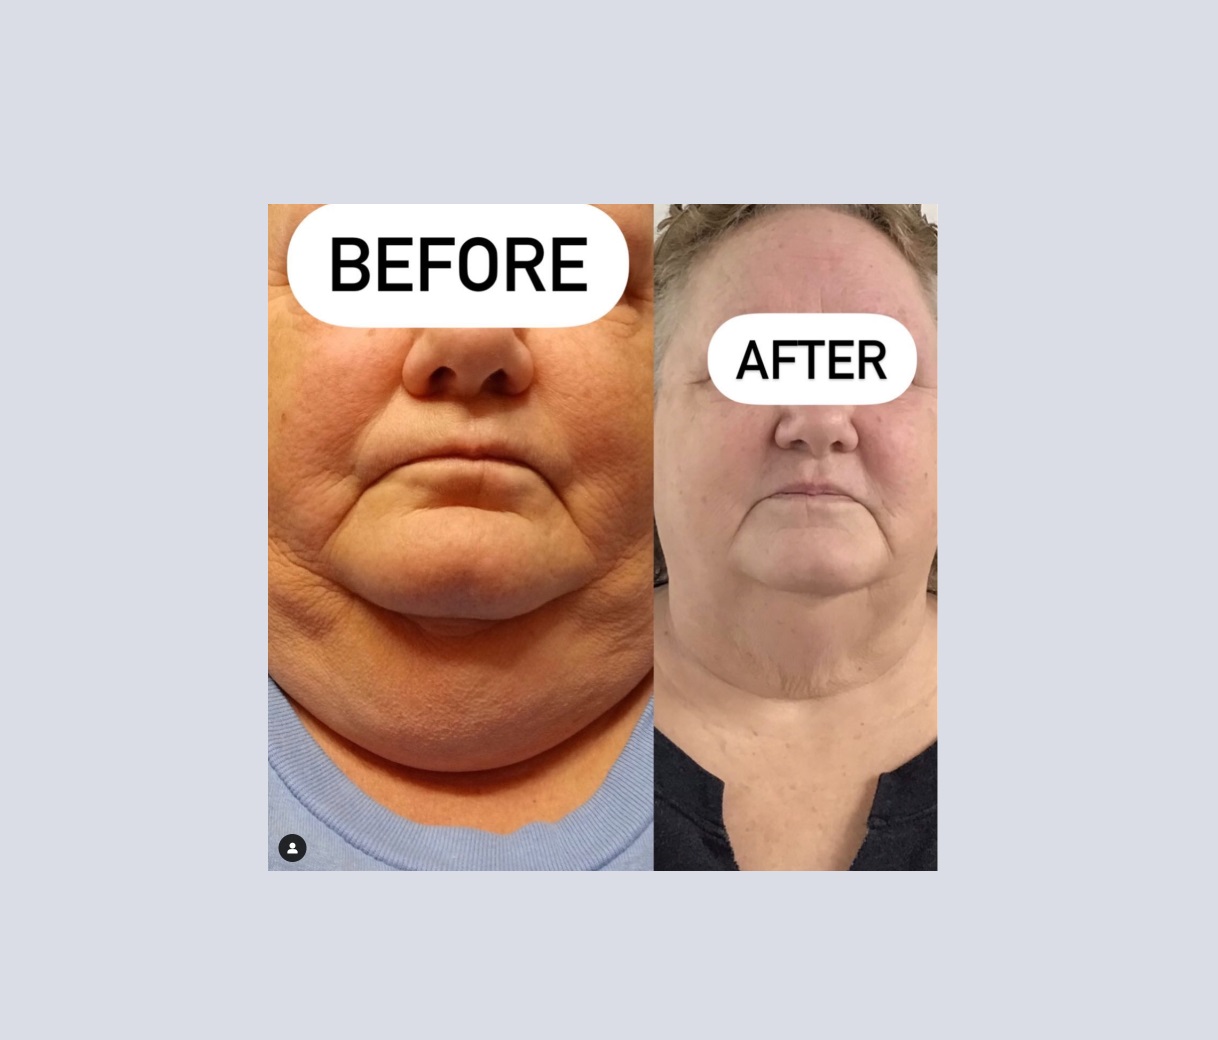 Client Achieves Remarkable Weight Loss and Neck Transformation in Just 5 Weeks!